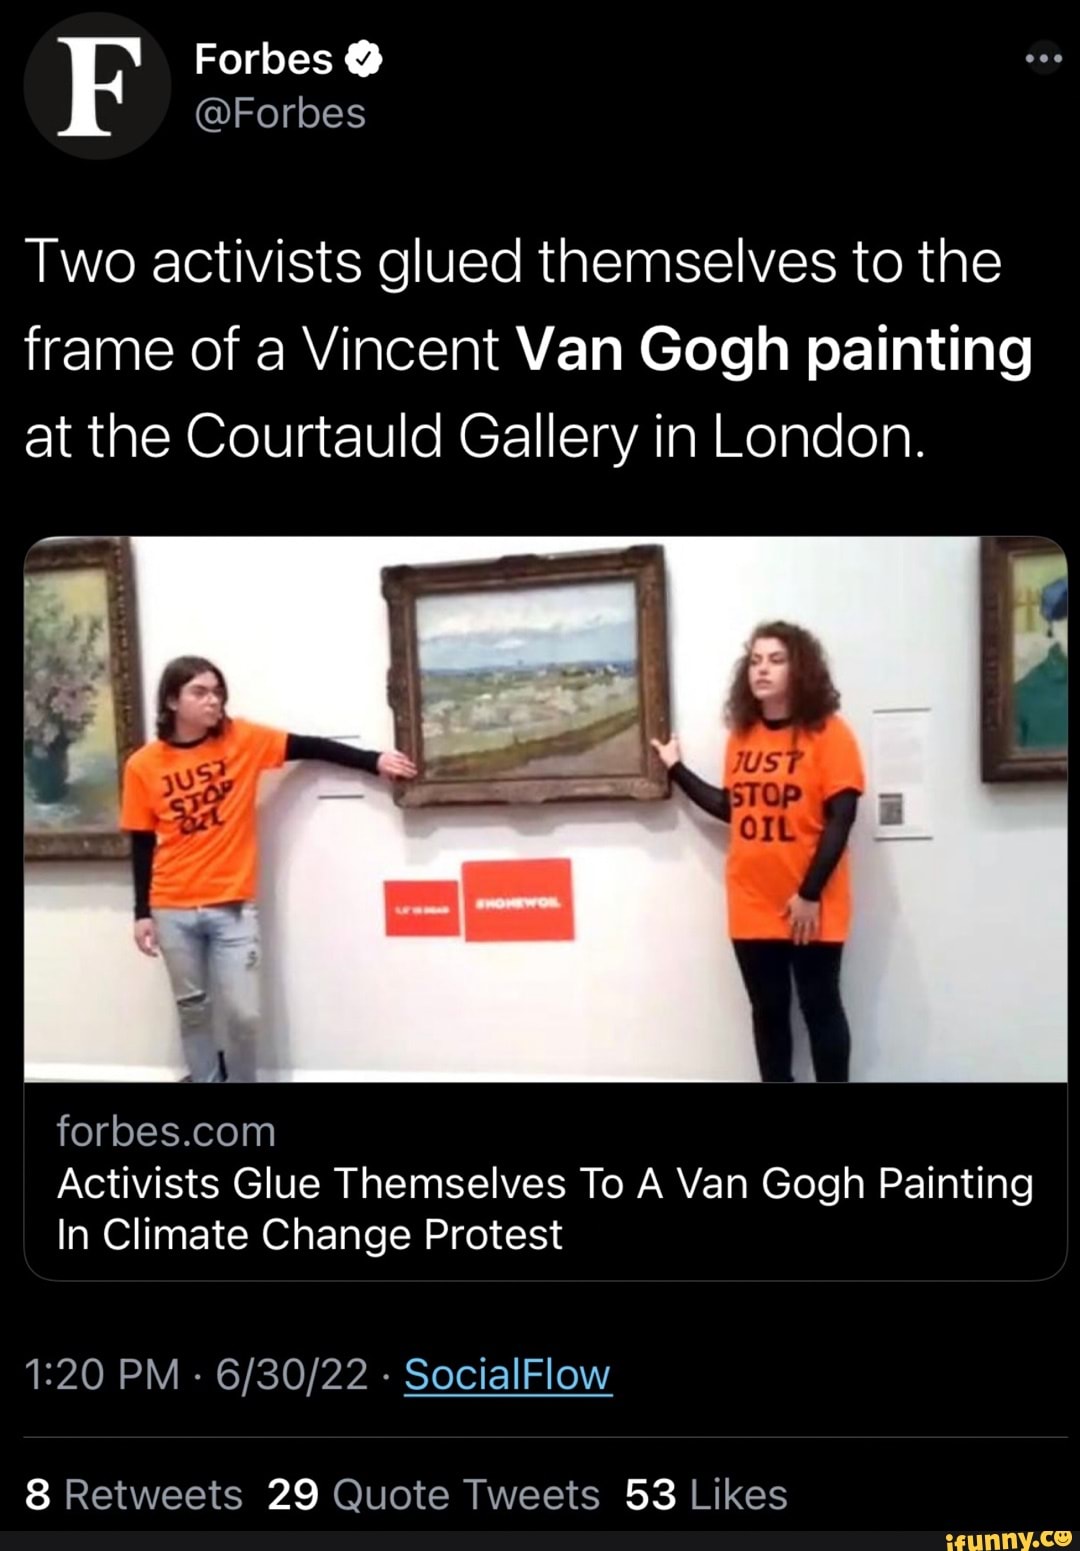 Climate Activists Glue Themselves to Van Gogh Painting in London